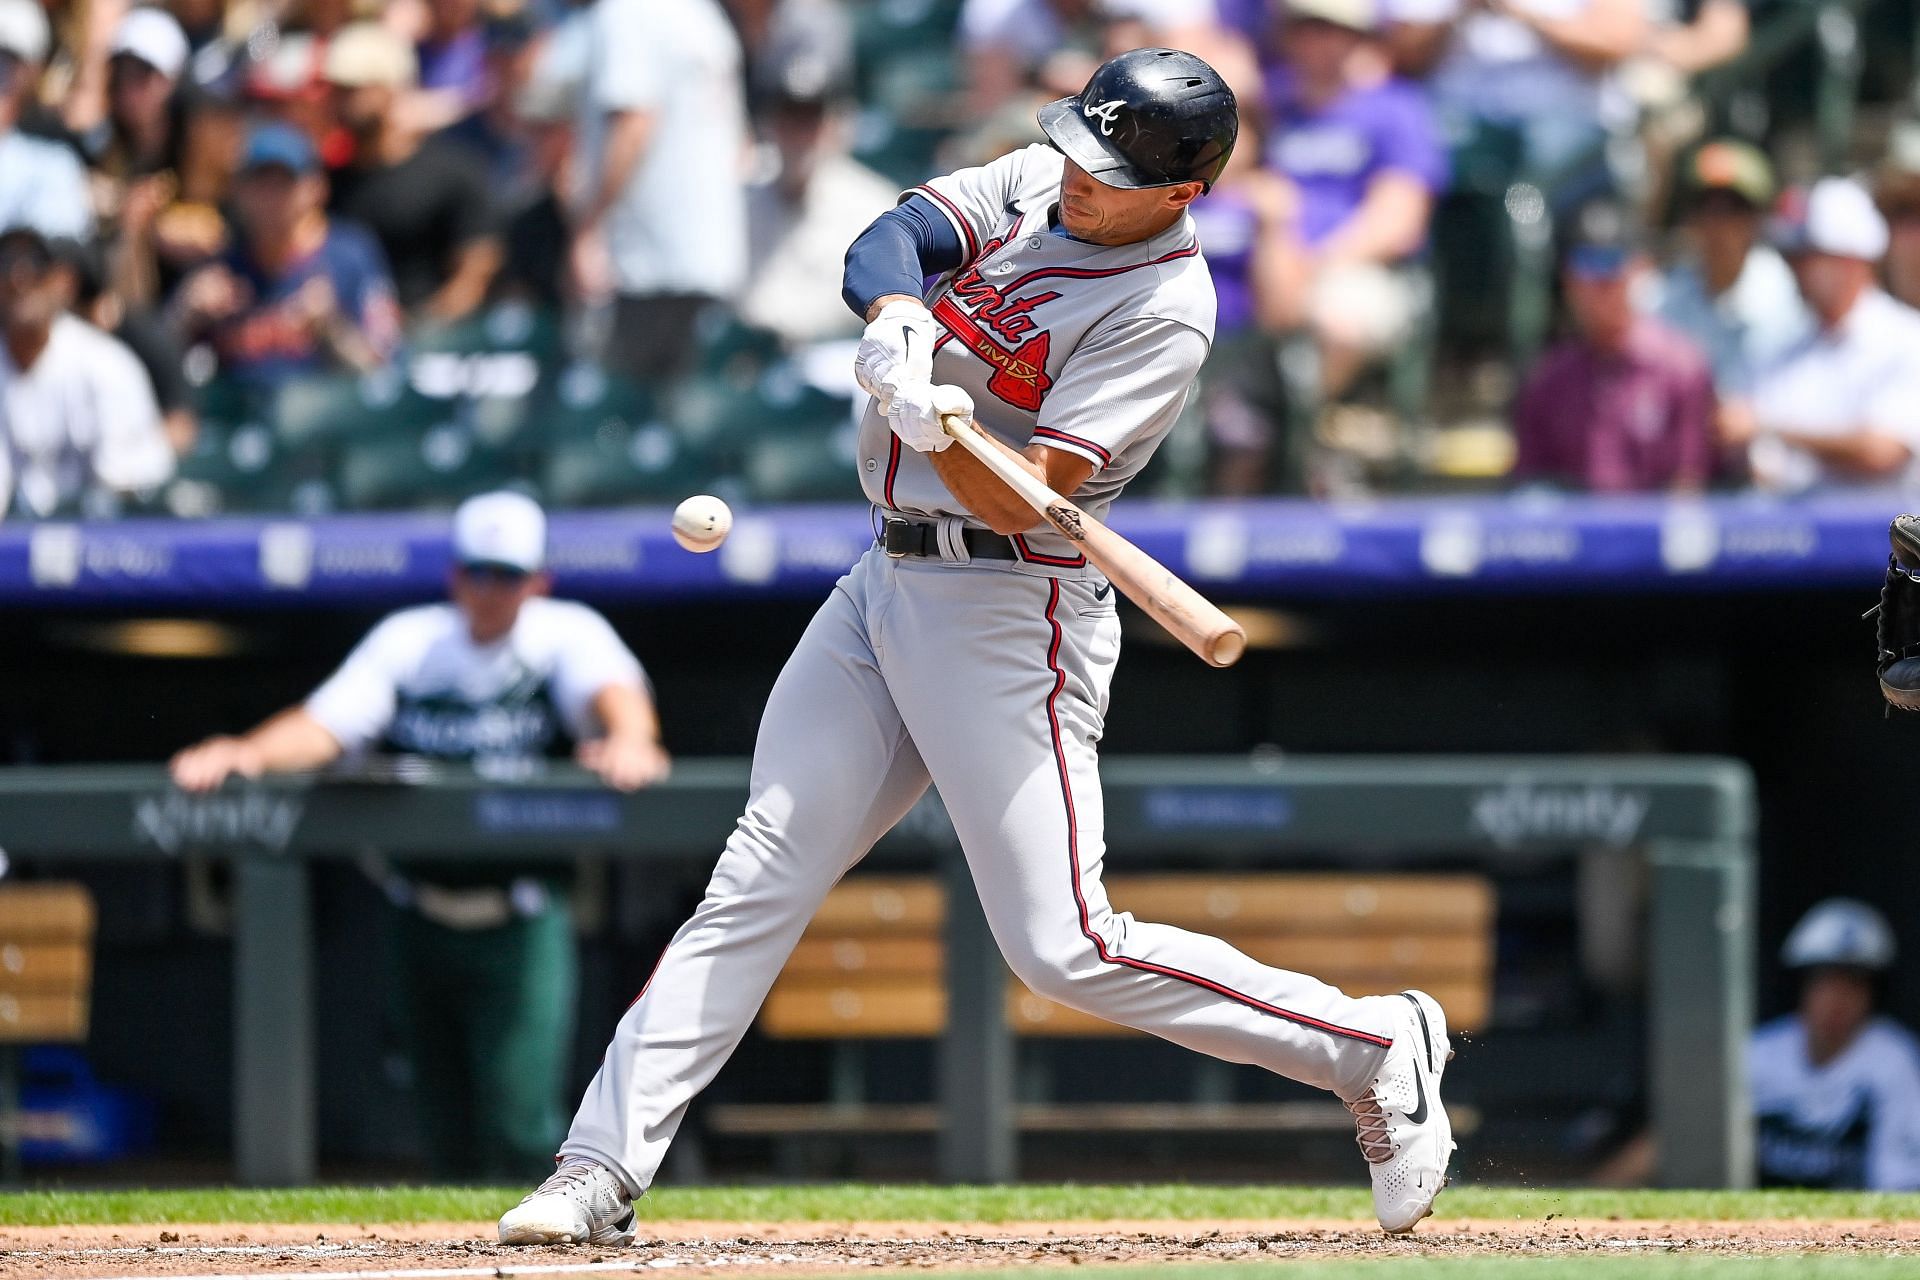 After hectic year, Braves' Matt Olson settled in, fixed his swing